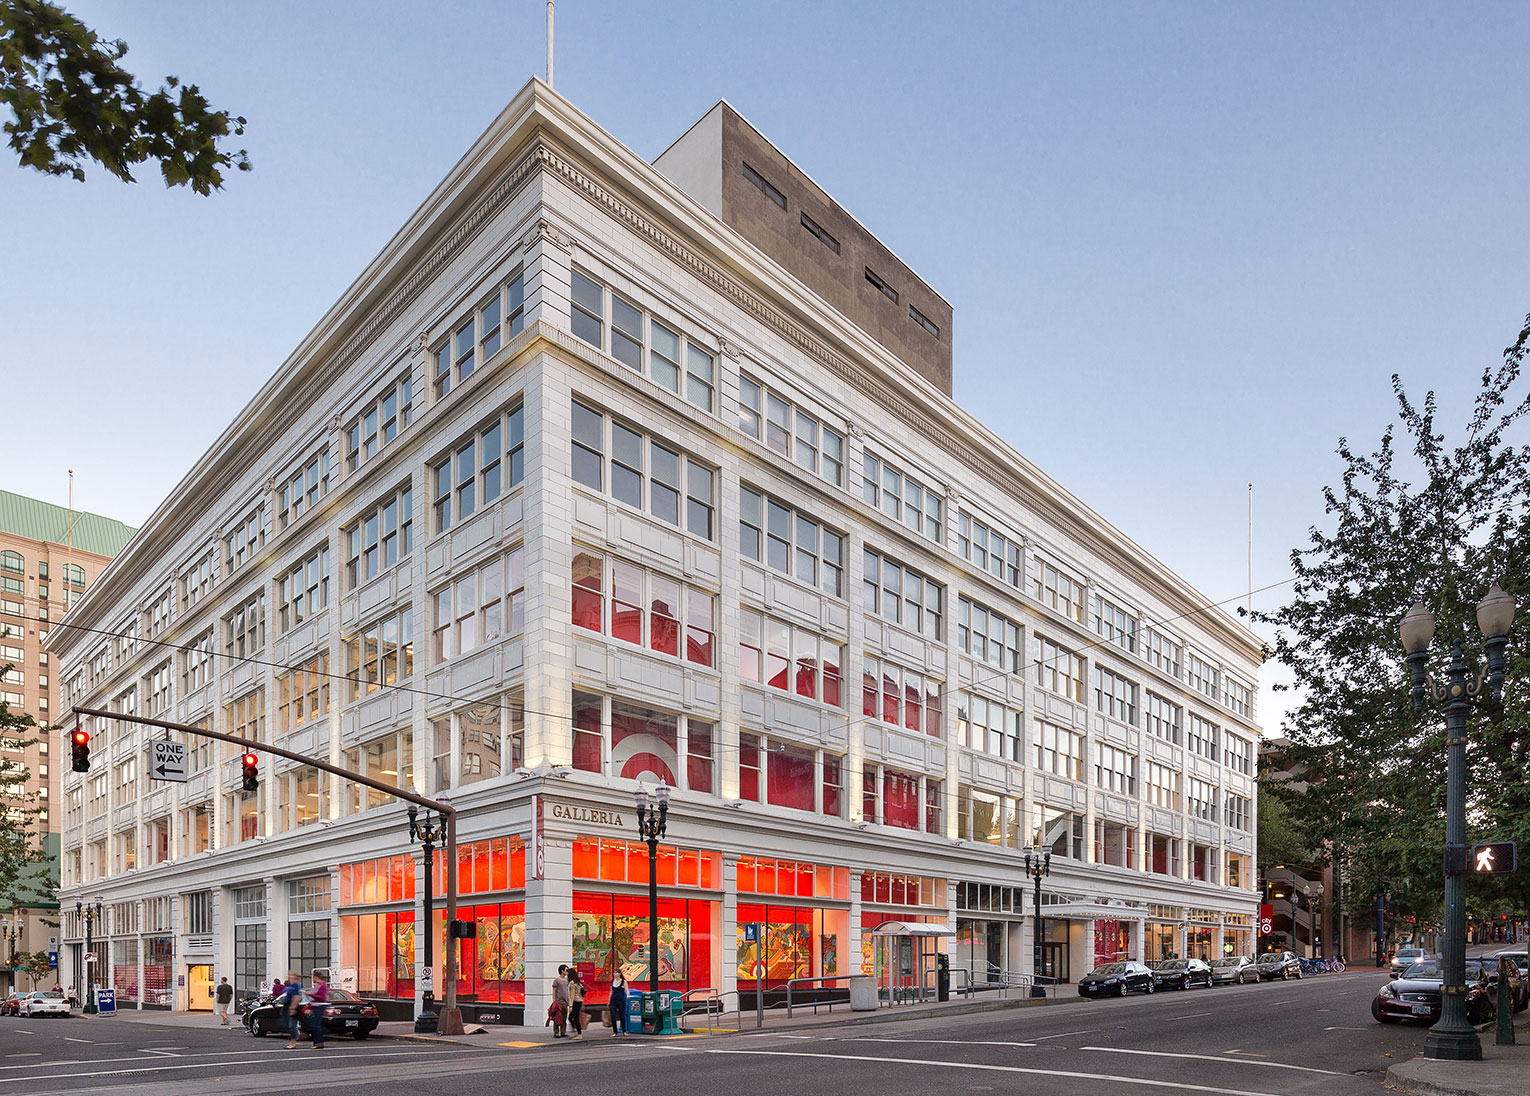 Corner view of downtown Portland's white terra cotta-clad historic department store, the Galleria Building, with many windows. The ground floor corner in the foreground is an art gallery with large, colorful paintings hanging on a bright orange wall. To the left of the gallery are two garage-style doors which appear to be loading docks. Through the windows of the second and third floors, a large Target logo can be seen, indicating the presence of the retailer in the space.